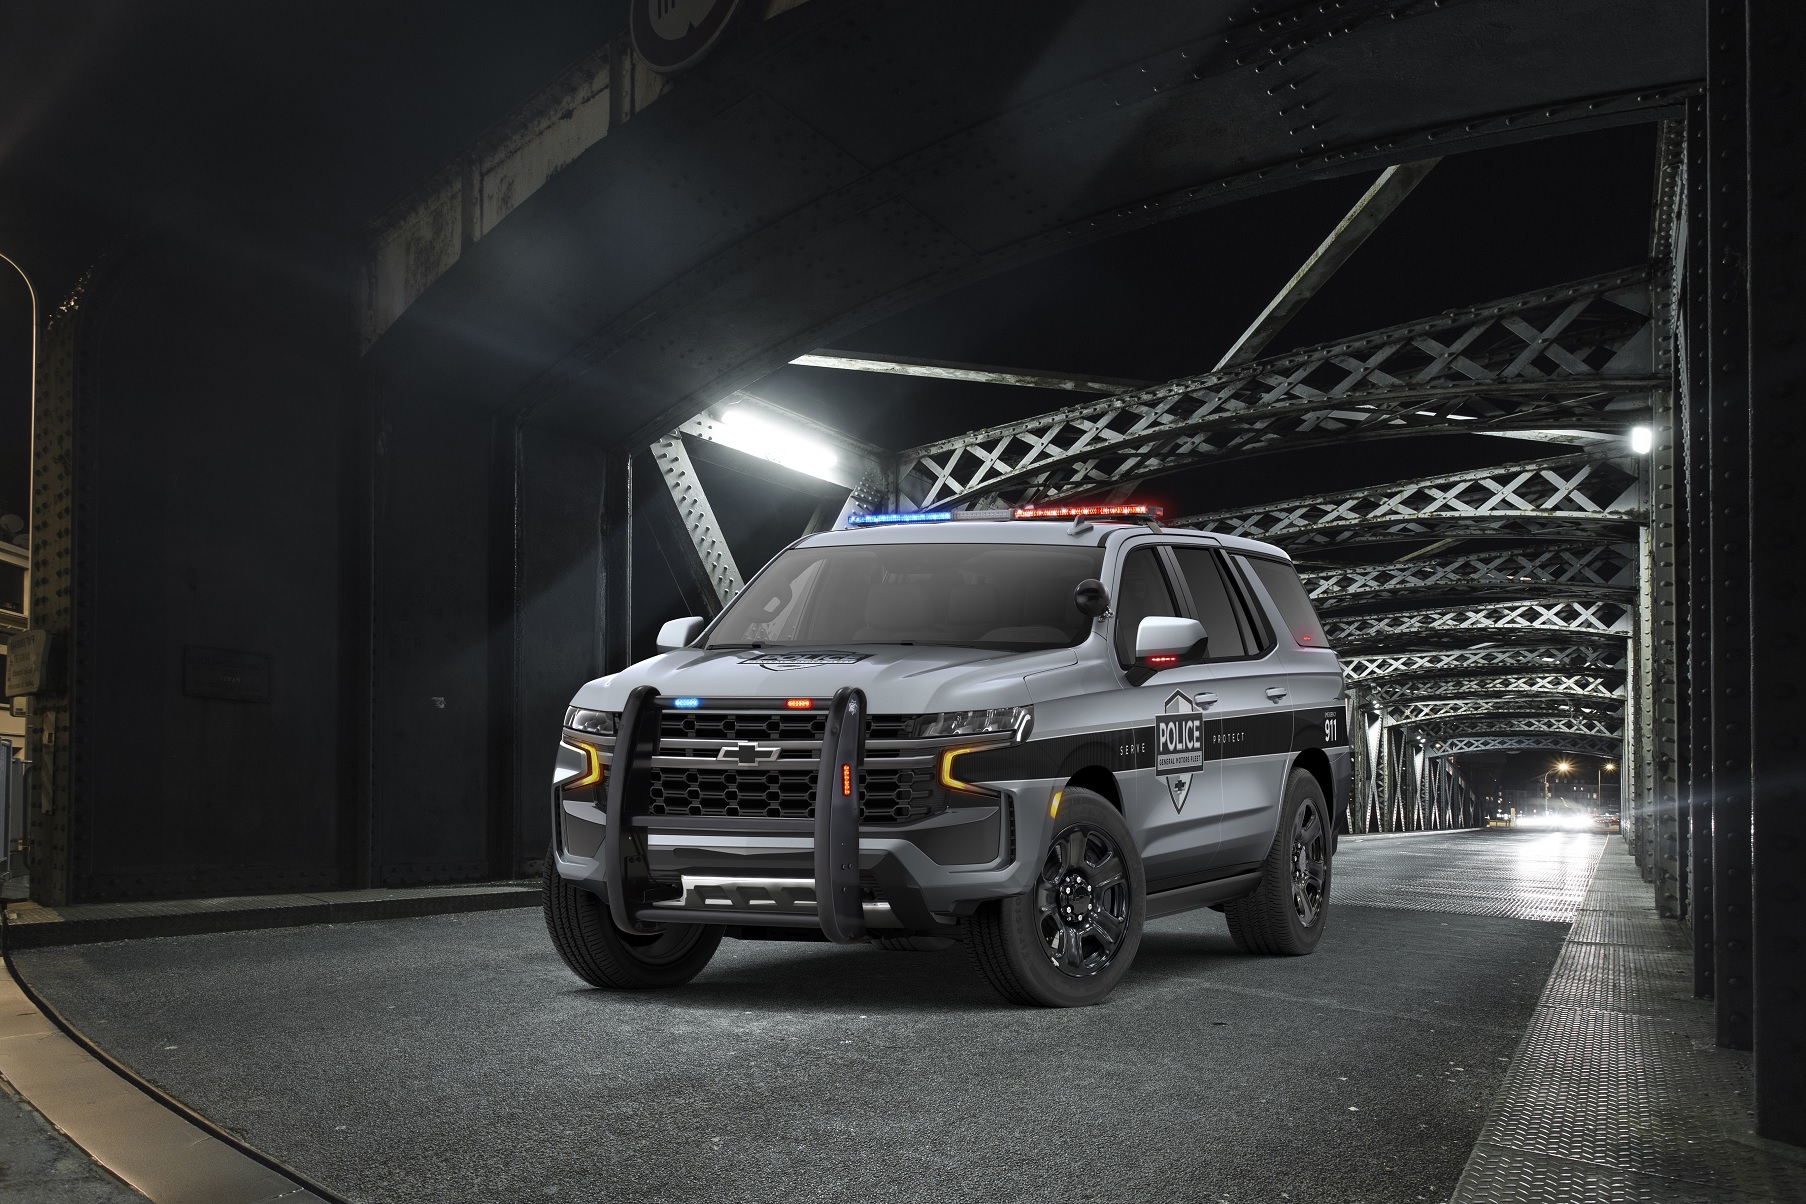 The New Chevy Tahoe Police Suv Is Ready To Intimidate You